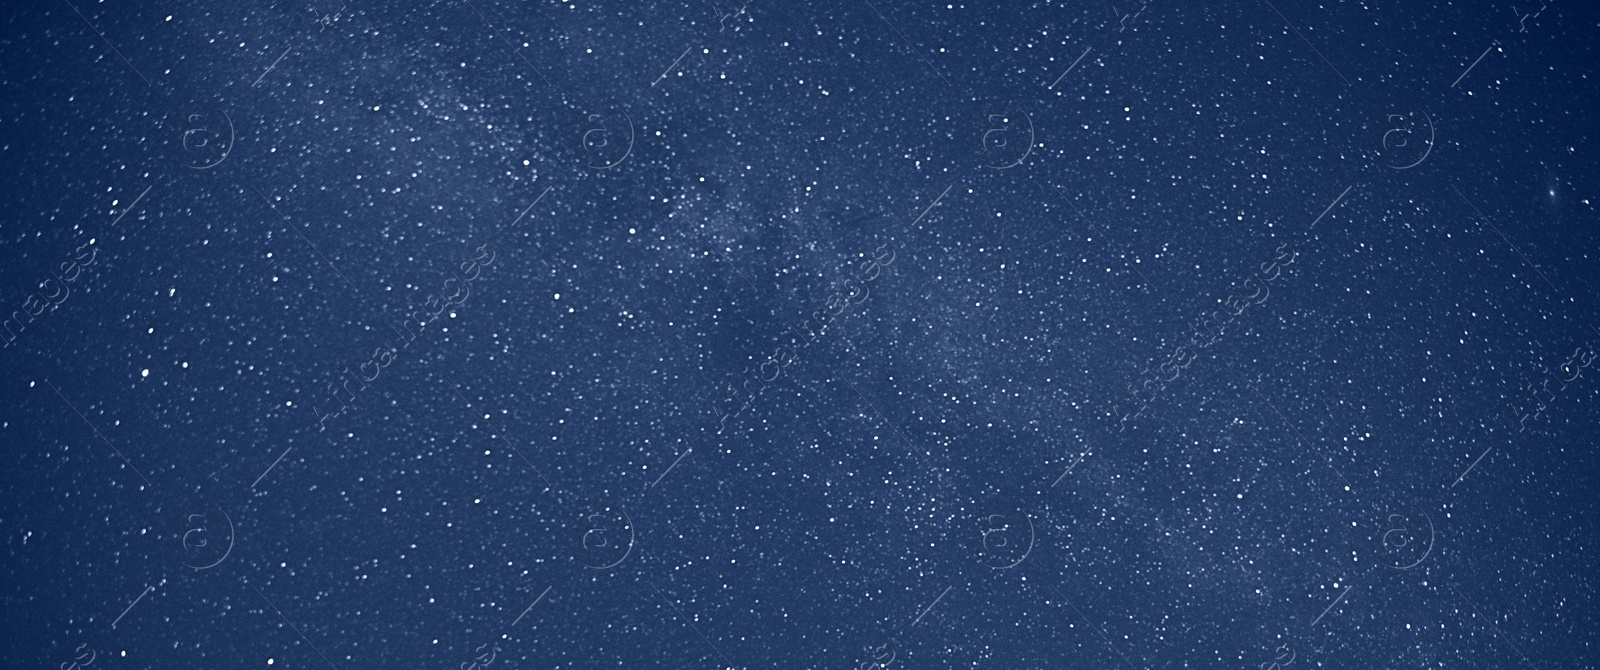 Image of Amazing starry sky at night, banner design